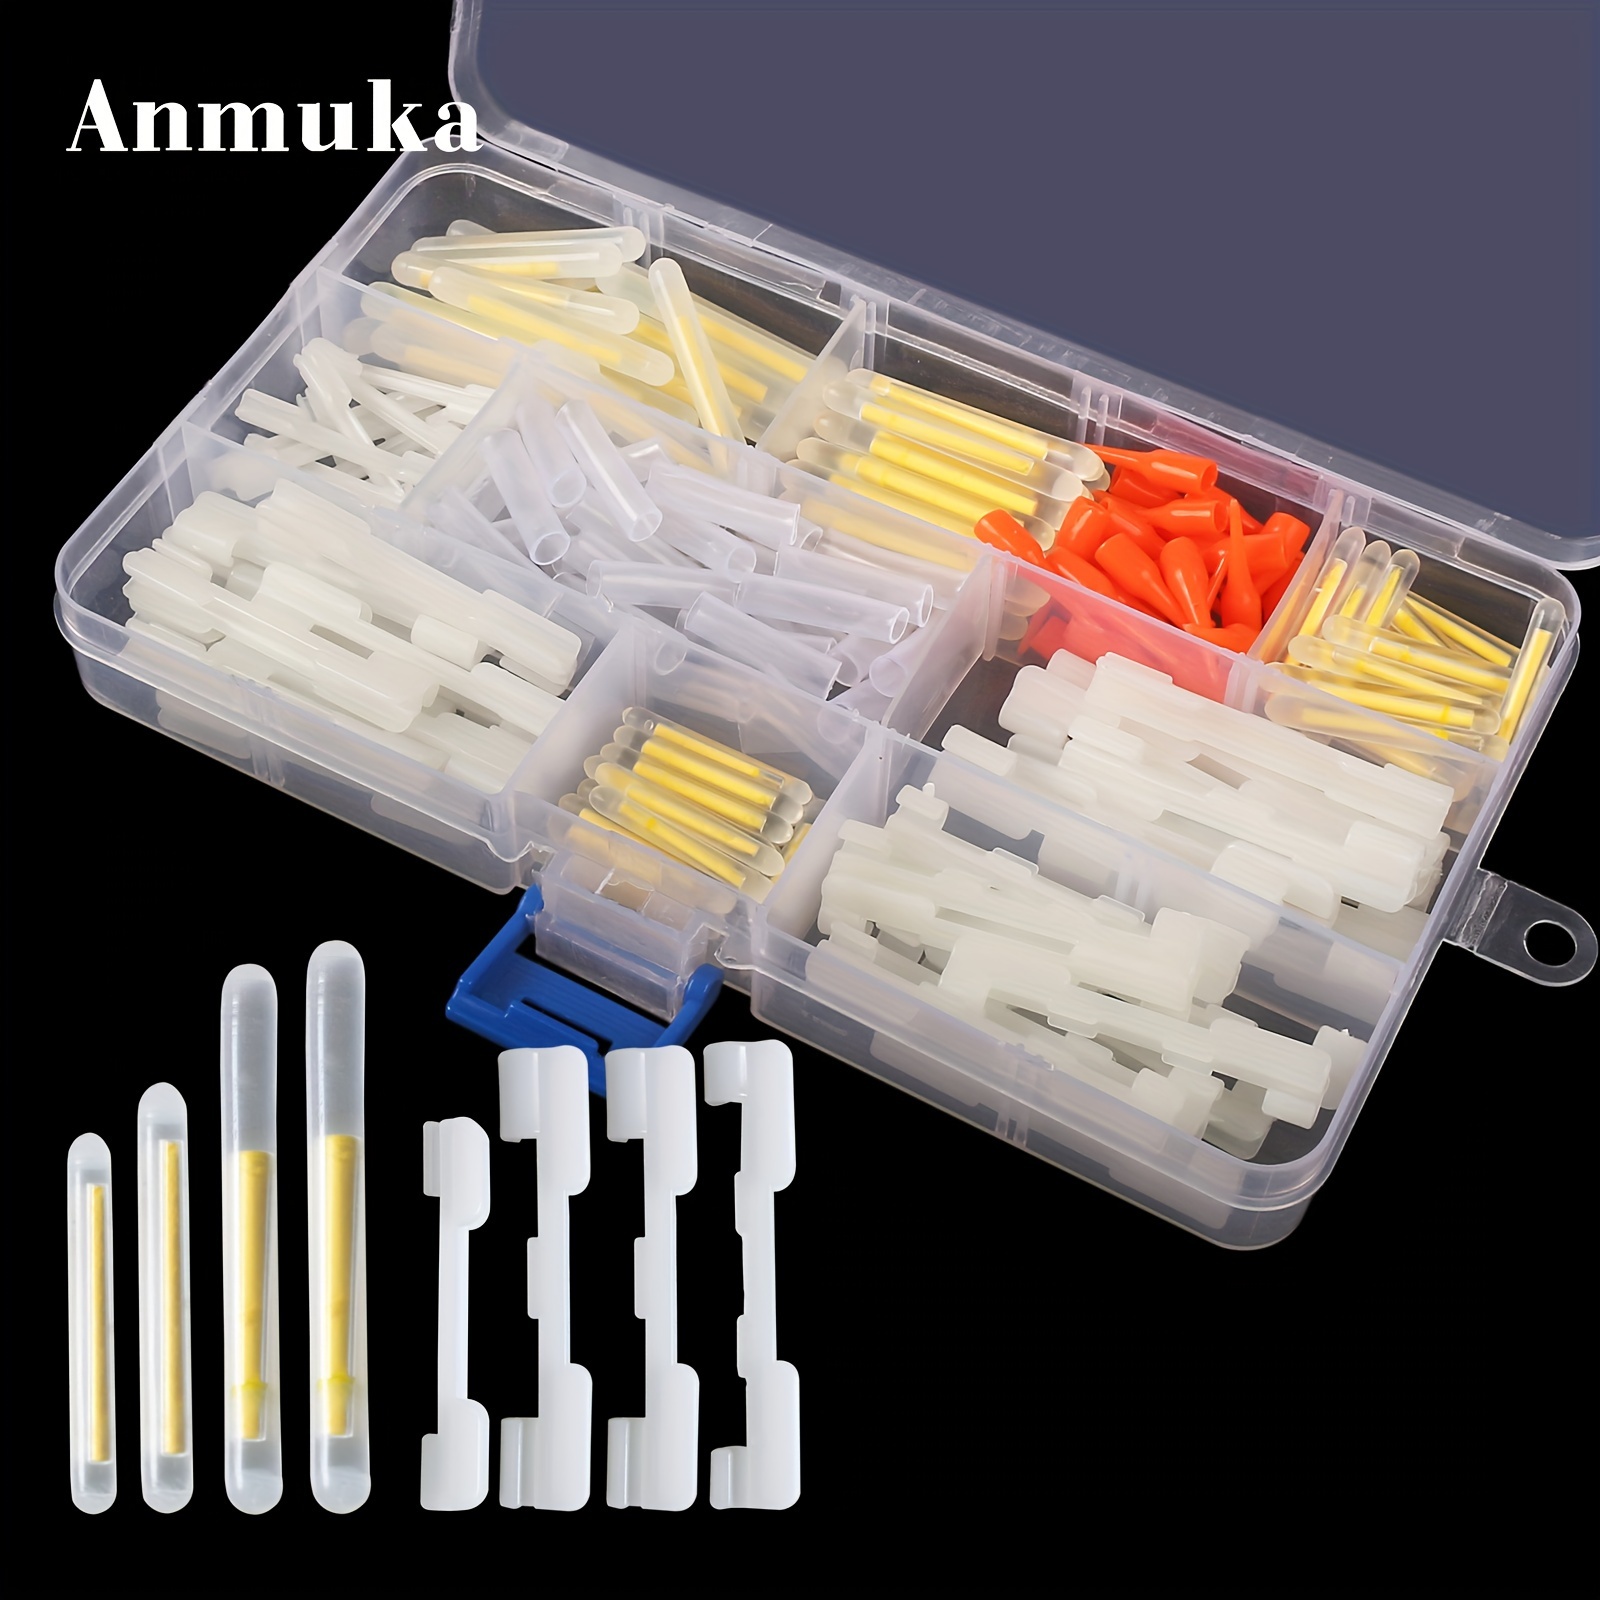 

Anmuka 190-piece Night Fishing Glow Stick & Accessory Kit - Durable Pe Material, Fluorescent Floats & Electronic Clips